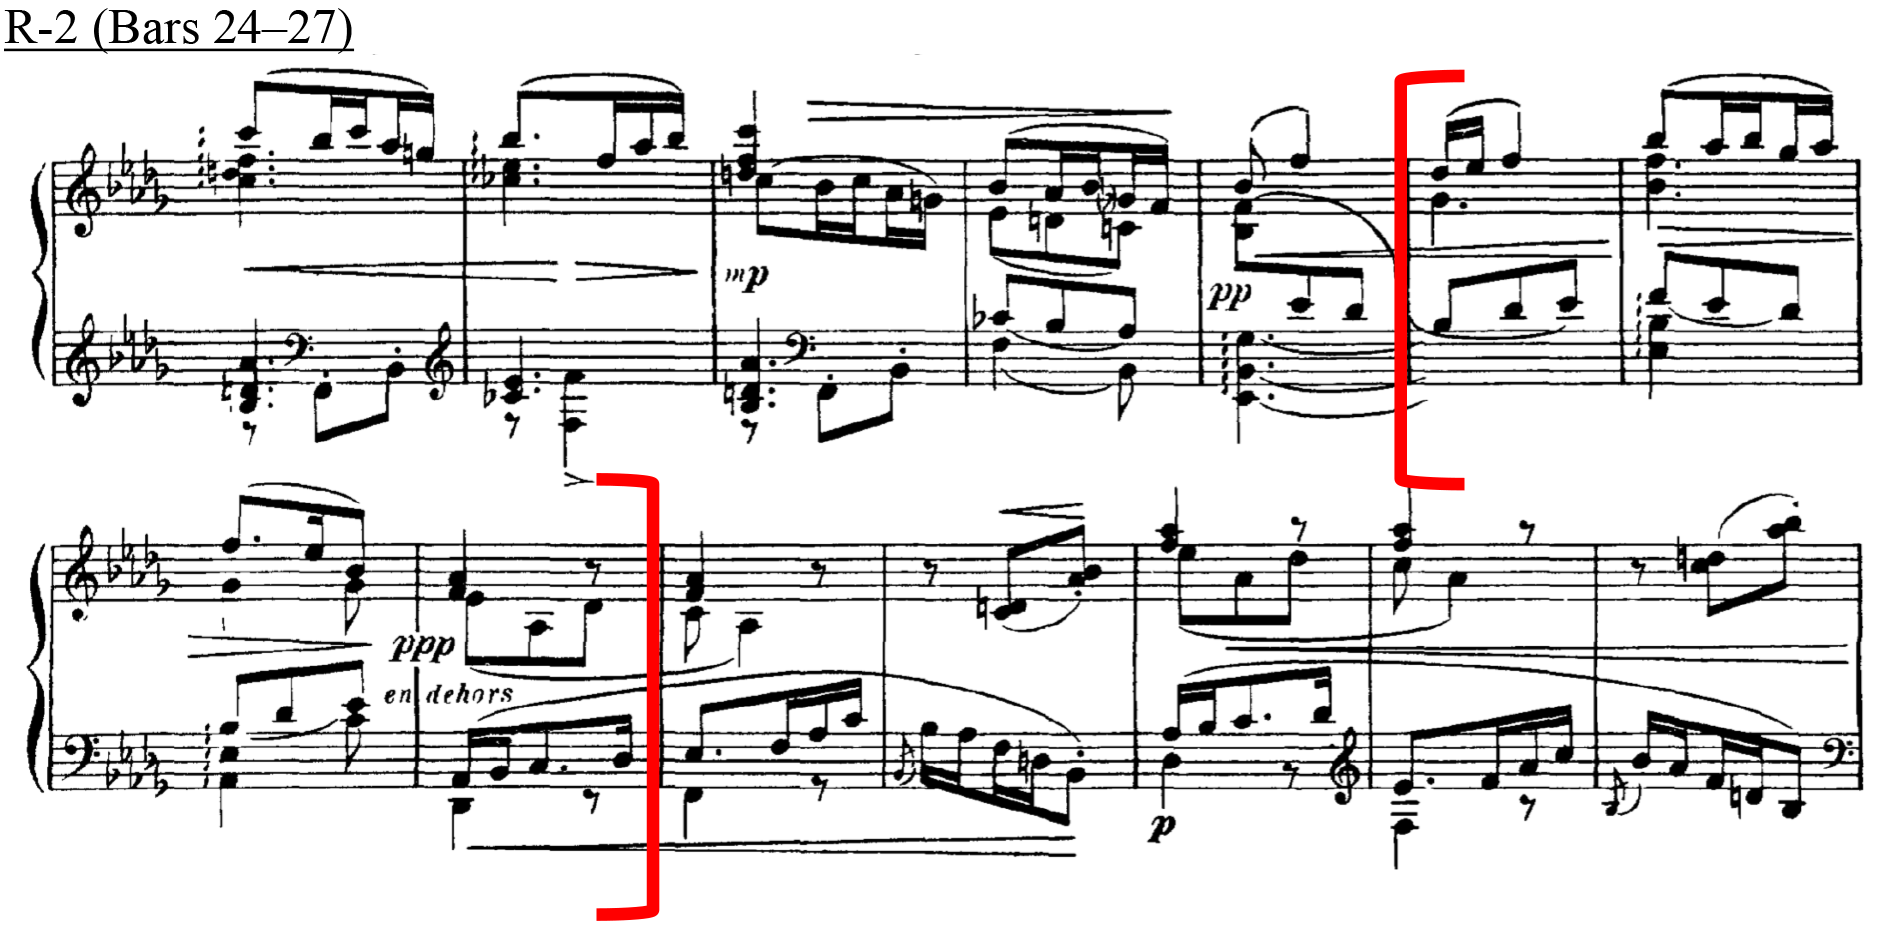 R-2 (Bars 24-27) contains two sets of staves. One set with treble clefs and another with a treble clef and bass clef. A portion of music is specifically identified within the staves.